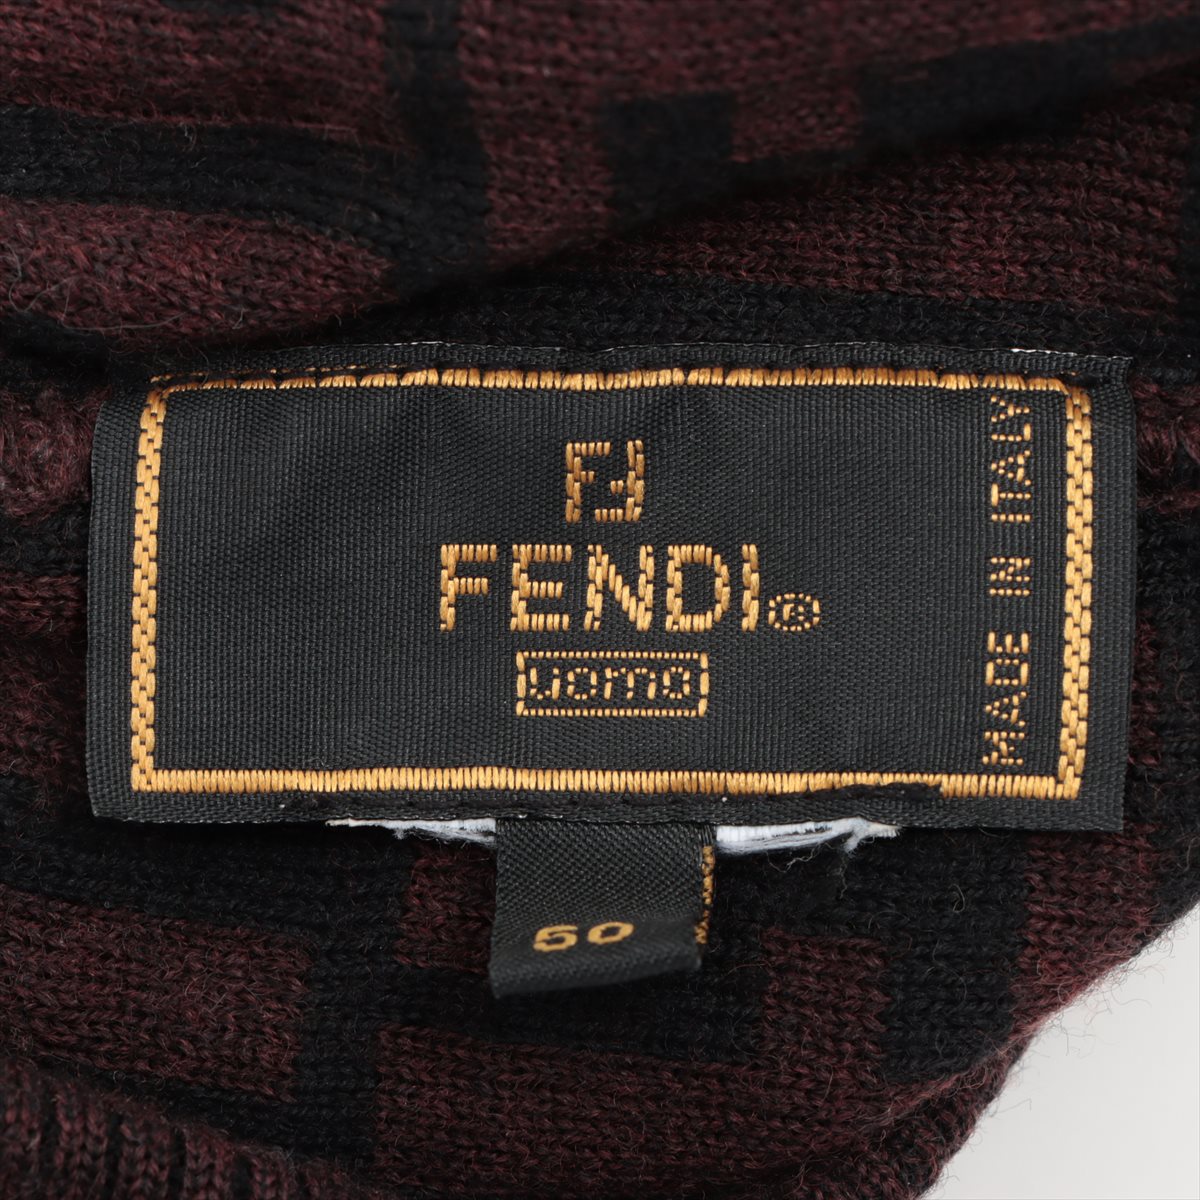 Fendi ZUCCa Knit cap 50/16 Other Black × Brown Wears Lint on fabric No quality tags Frayed